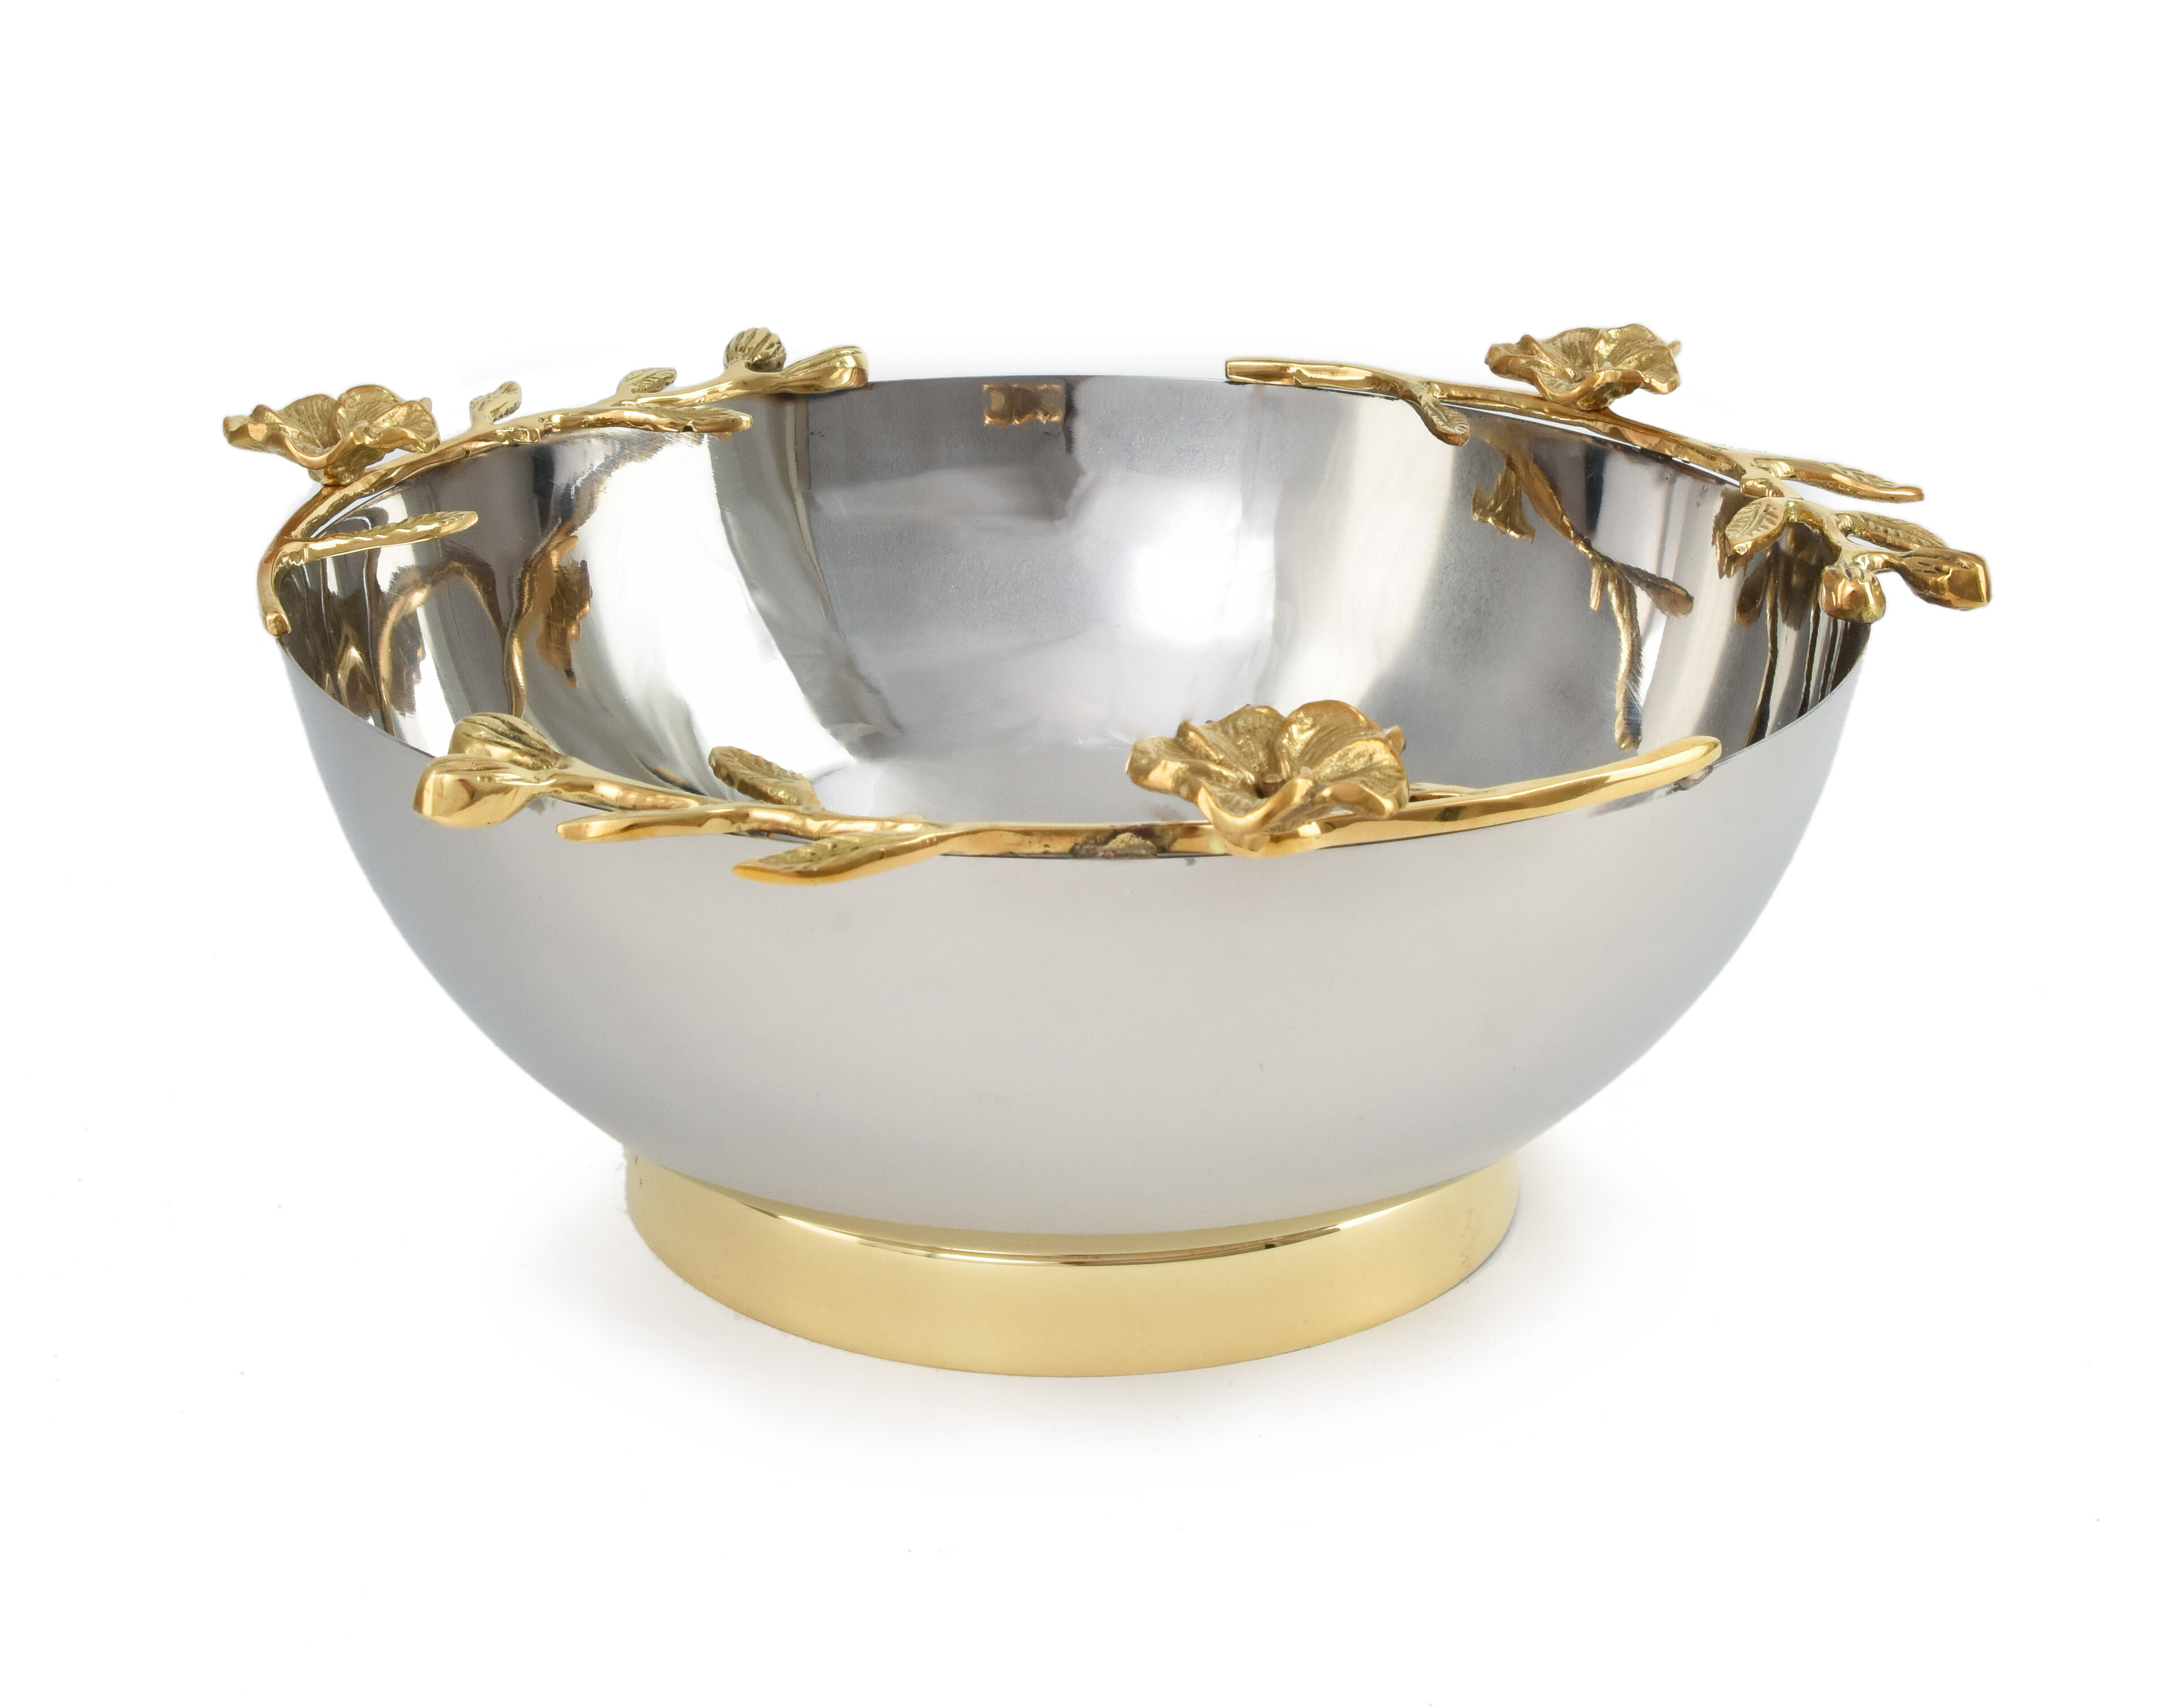 30cm Round Decorative Bowl With Hammered Detail Carousel Home and Gifts Stylish Silver Metal Display Dish